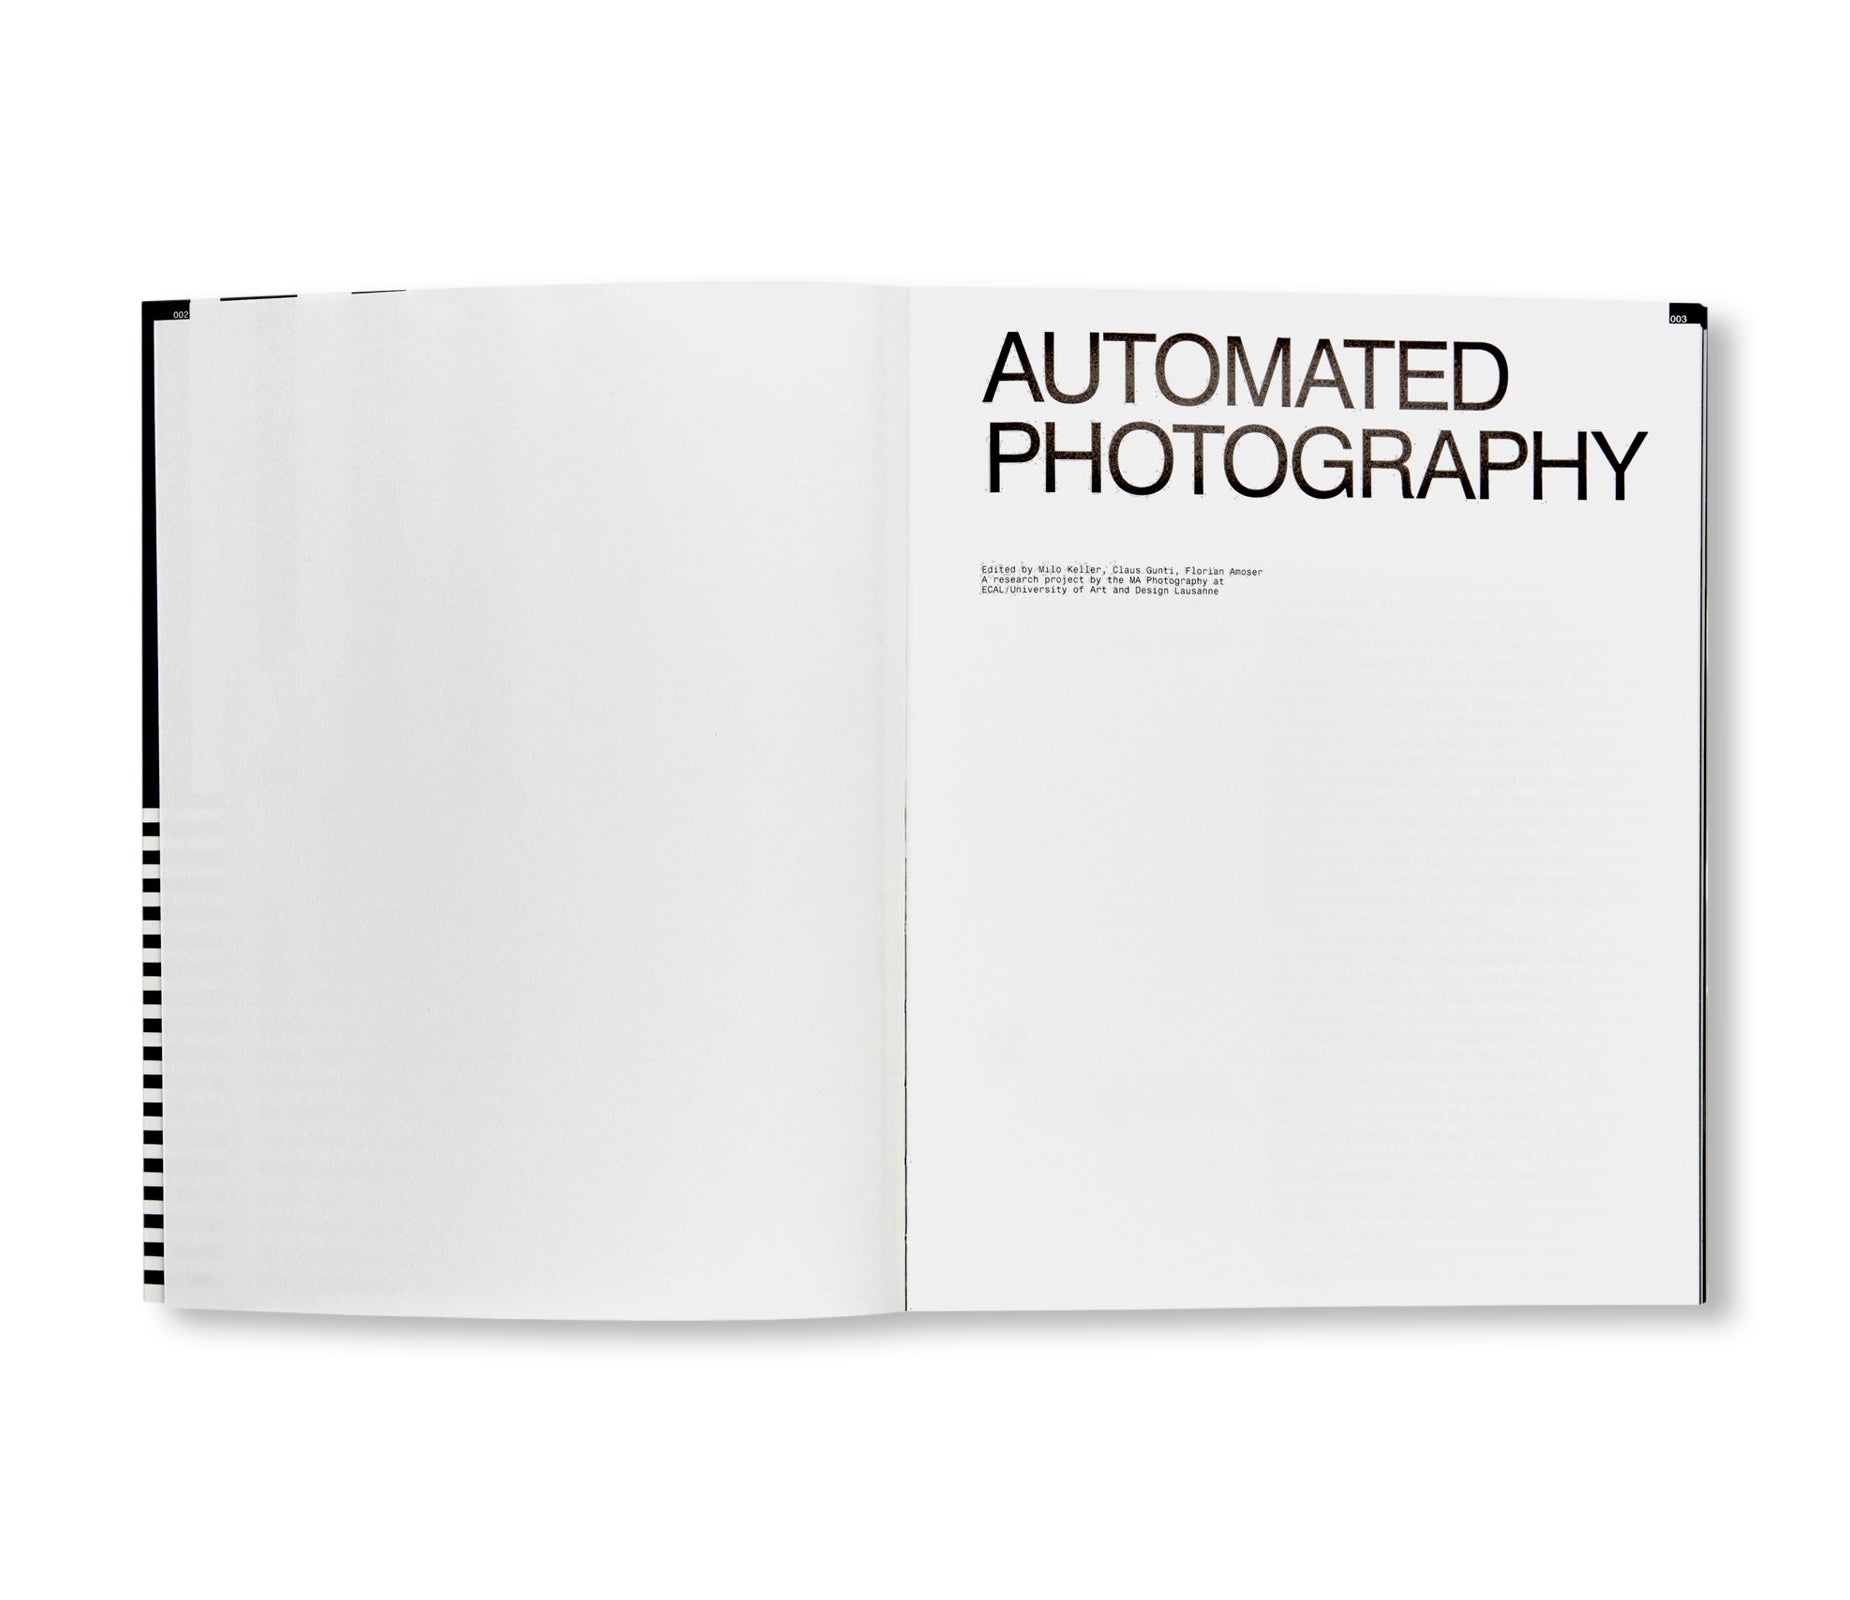 AUTOMATED PHOTOGRAPHY